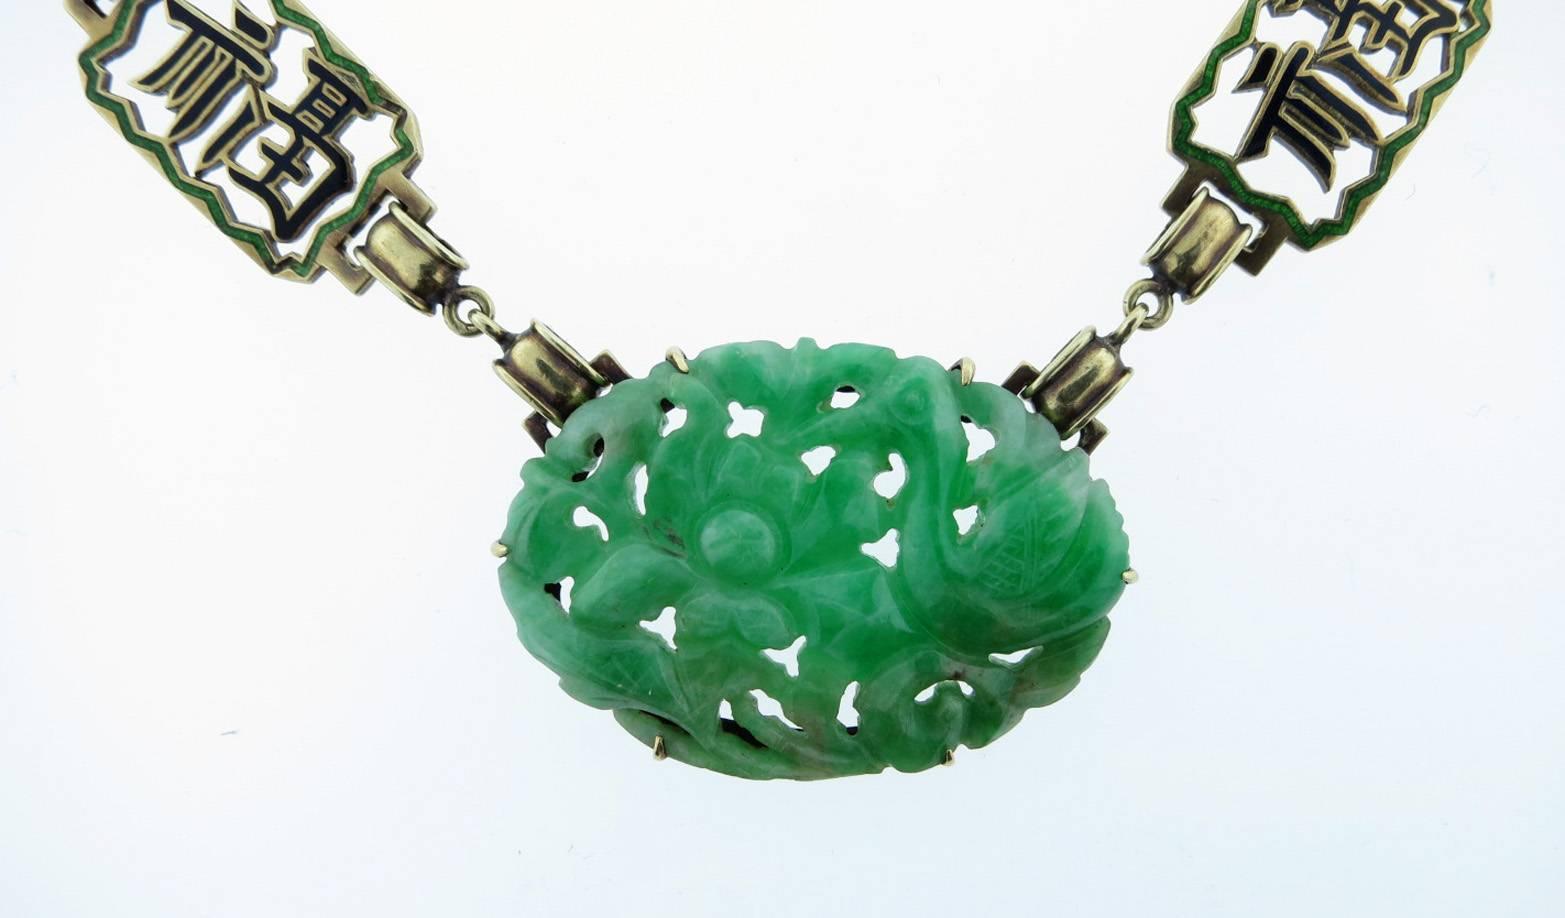 14kt. yellow gold link jade plaque necklace. The carved center plaque measures approx 1 1/4 inches and is carved with flowers and bird motif. The four marquise shape carved jade disks are alternated with eight light green and black enamel open work